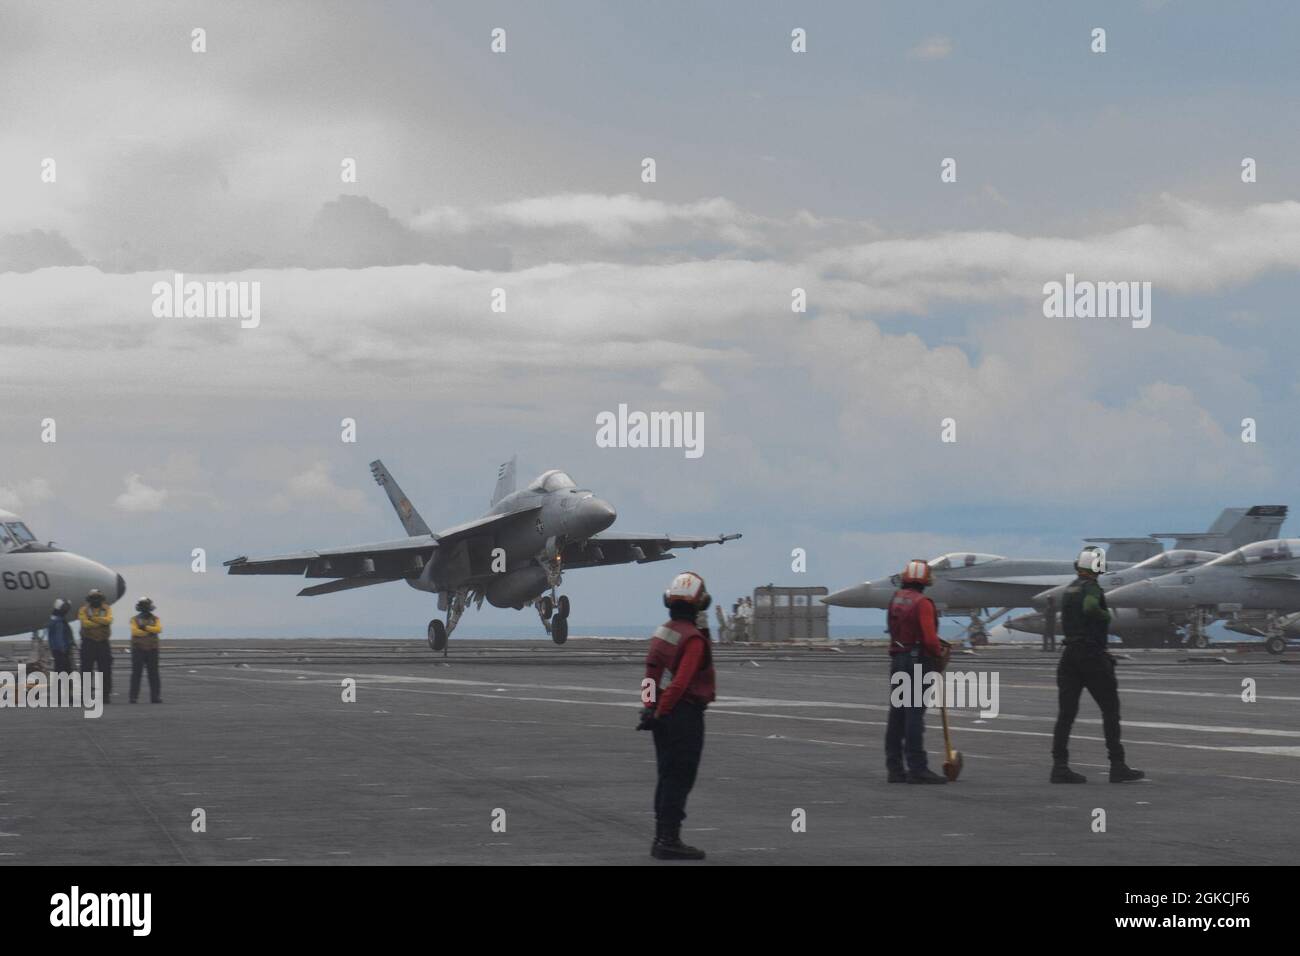 INDIAN OCEAN (March 13, 2021) – An F/A-18E Super Hornet, assigned to the “Golden Warriors” of Strike Fighter Squadron (VFA) 87, lands on the flight deck of the aircraft carrier USS Theodore Roosevelt (CVN 71) March 13, 2021. The Theodore Roosevelt Carrier Strike Group is on a scheduled deployment to the U.S. 7th Fleet area of operations. As the U.S. Navy’s largest forward-deployed fleet, 7th Fleet routinely operates and interacts with 35 maritime nations while conducting missions to preserve and protect a free and open Indo-Pacific Region. Stock Photo